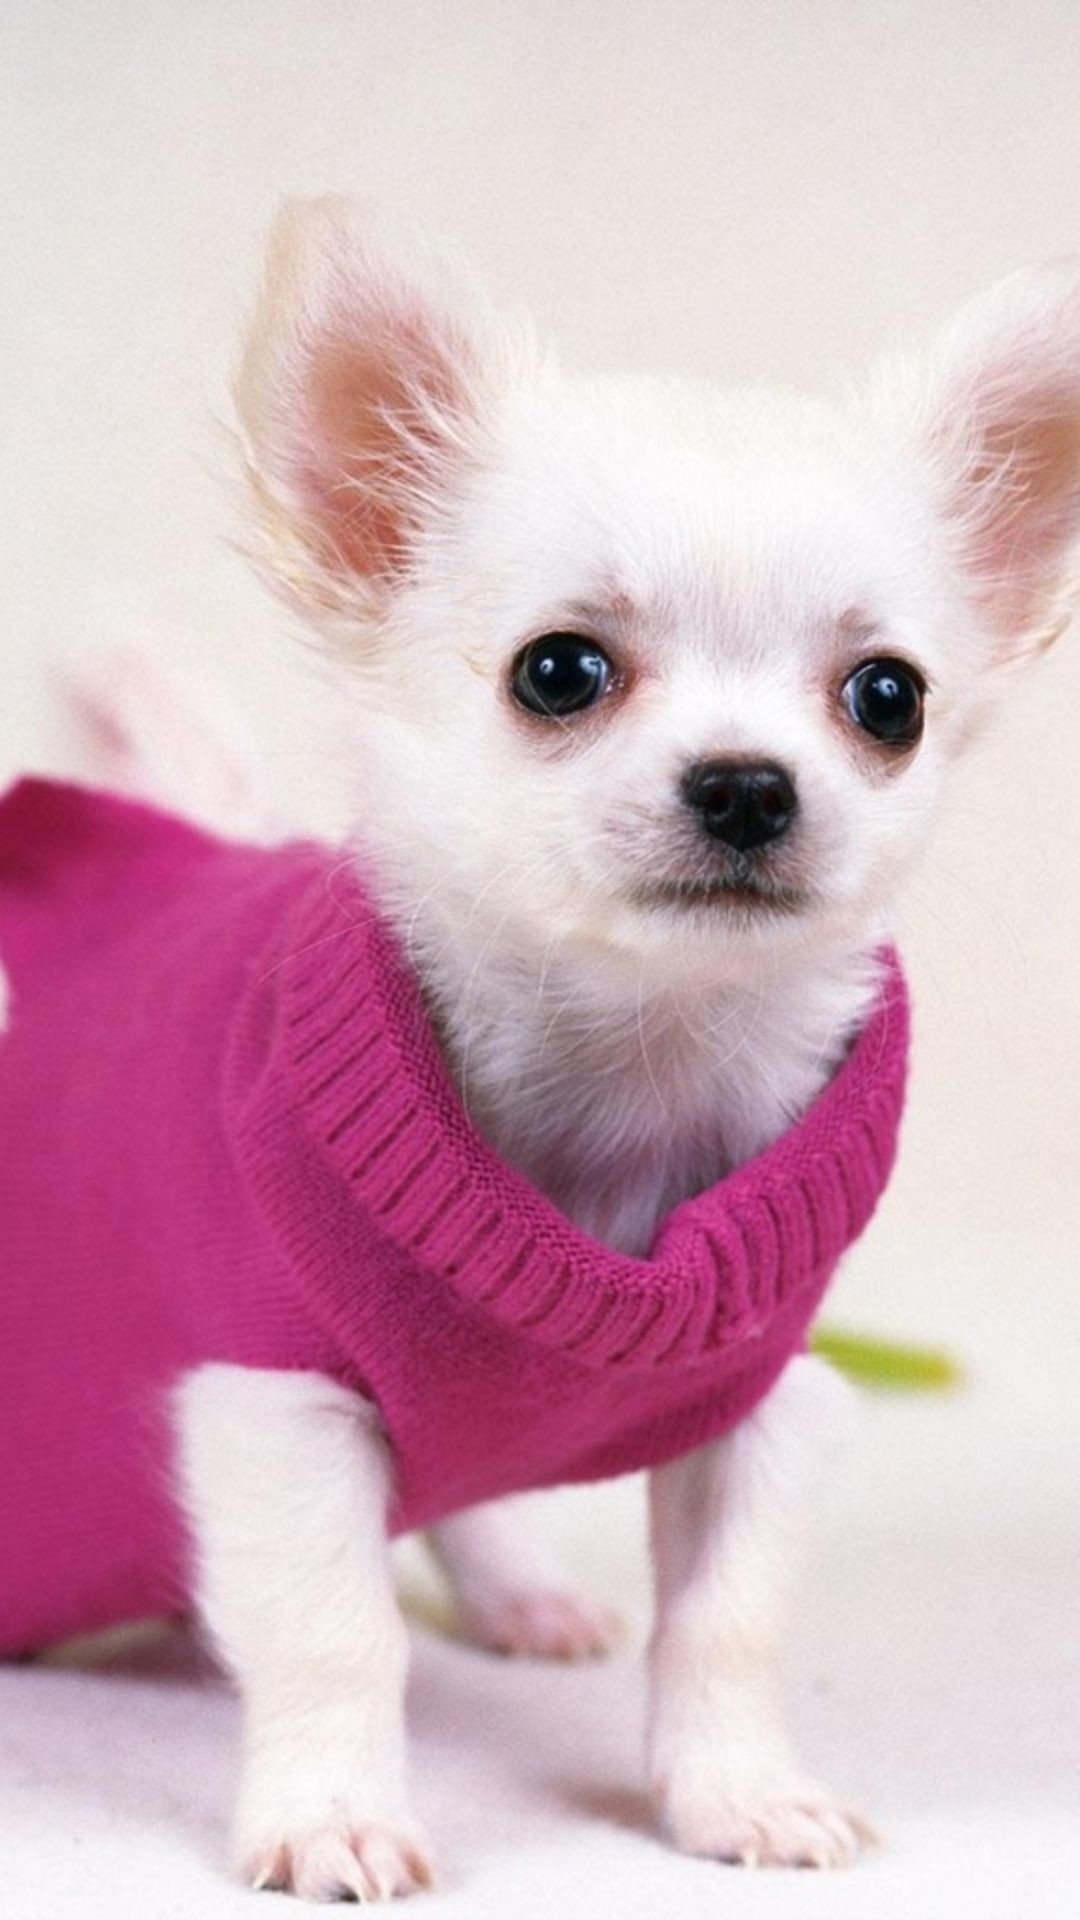 Cute Pretty Dog In Red Sweater iPhone 6 Wallpaper Download